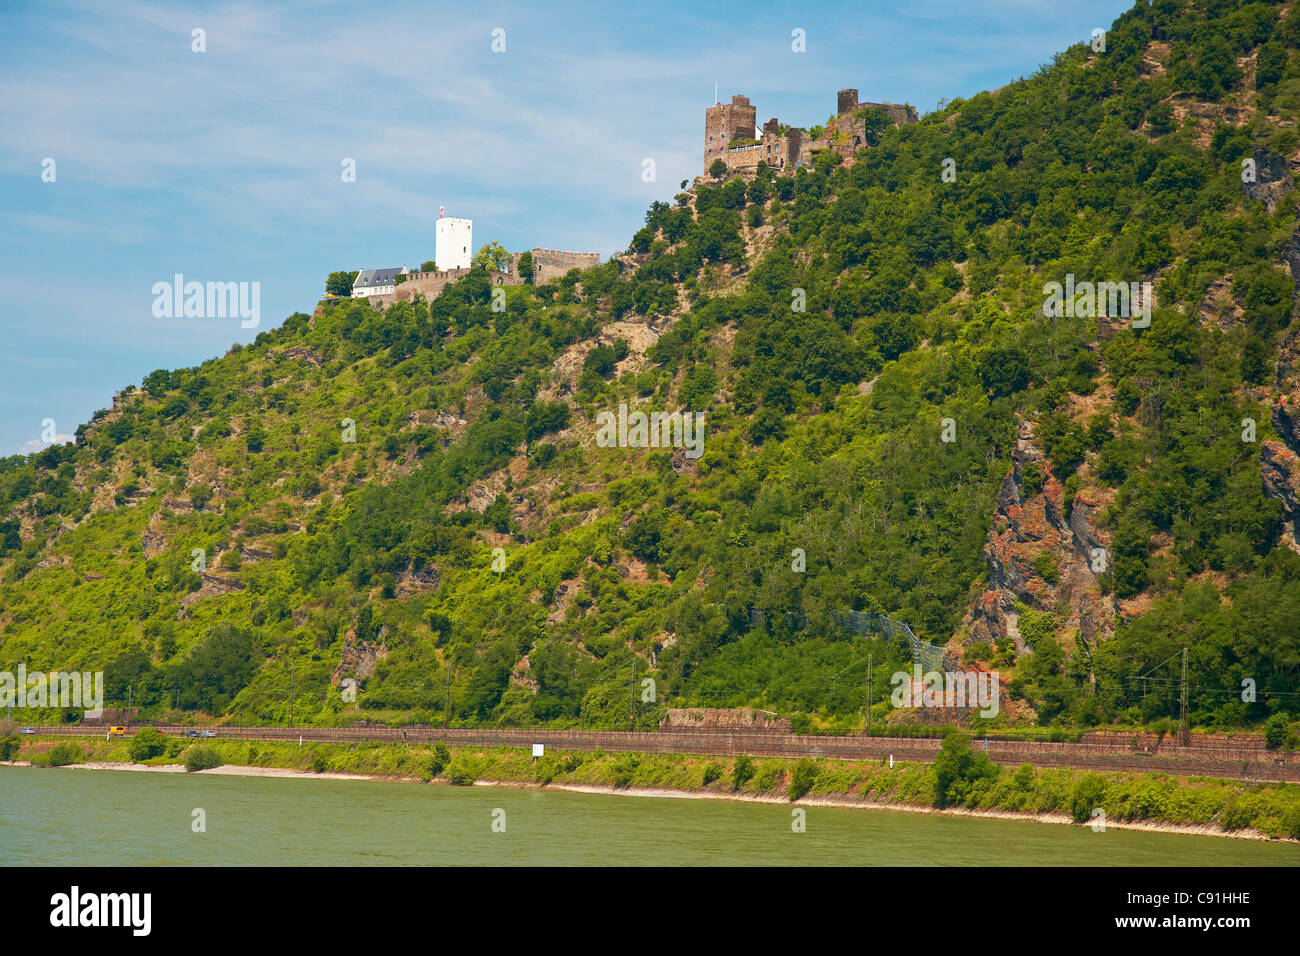 Friednly brothers Sterrenberg castle and Liebenstein castle Kamp-Bornhofen Shipping on the river Rhine Koeln-Duesseldorfer Mitte Stock Photo